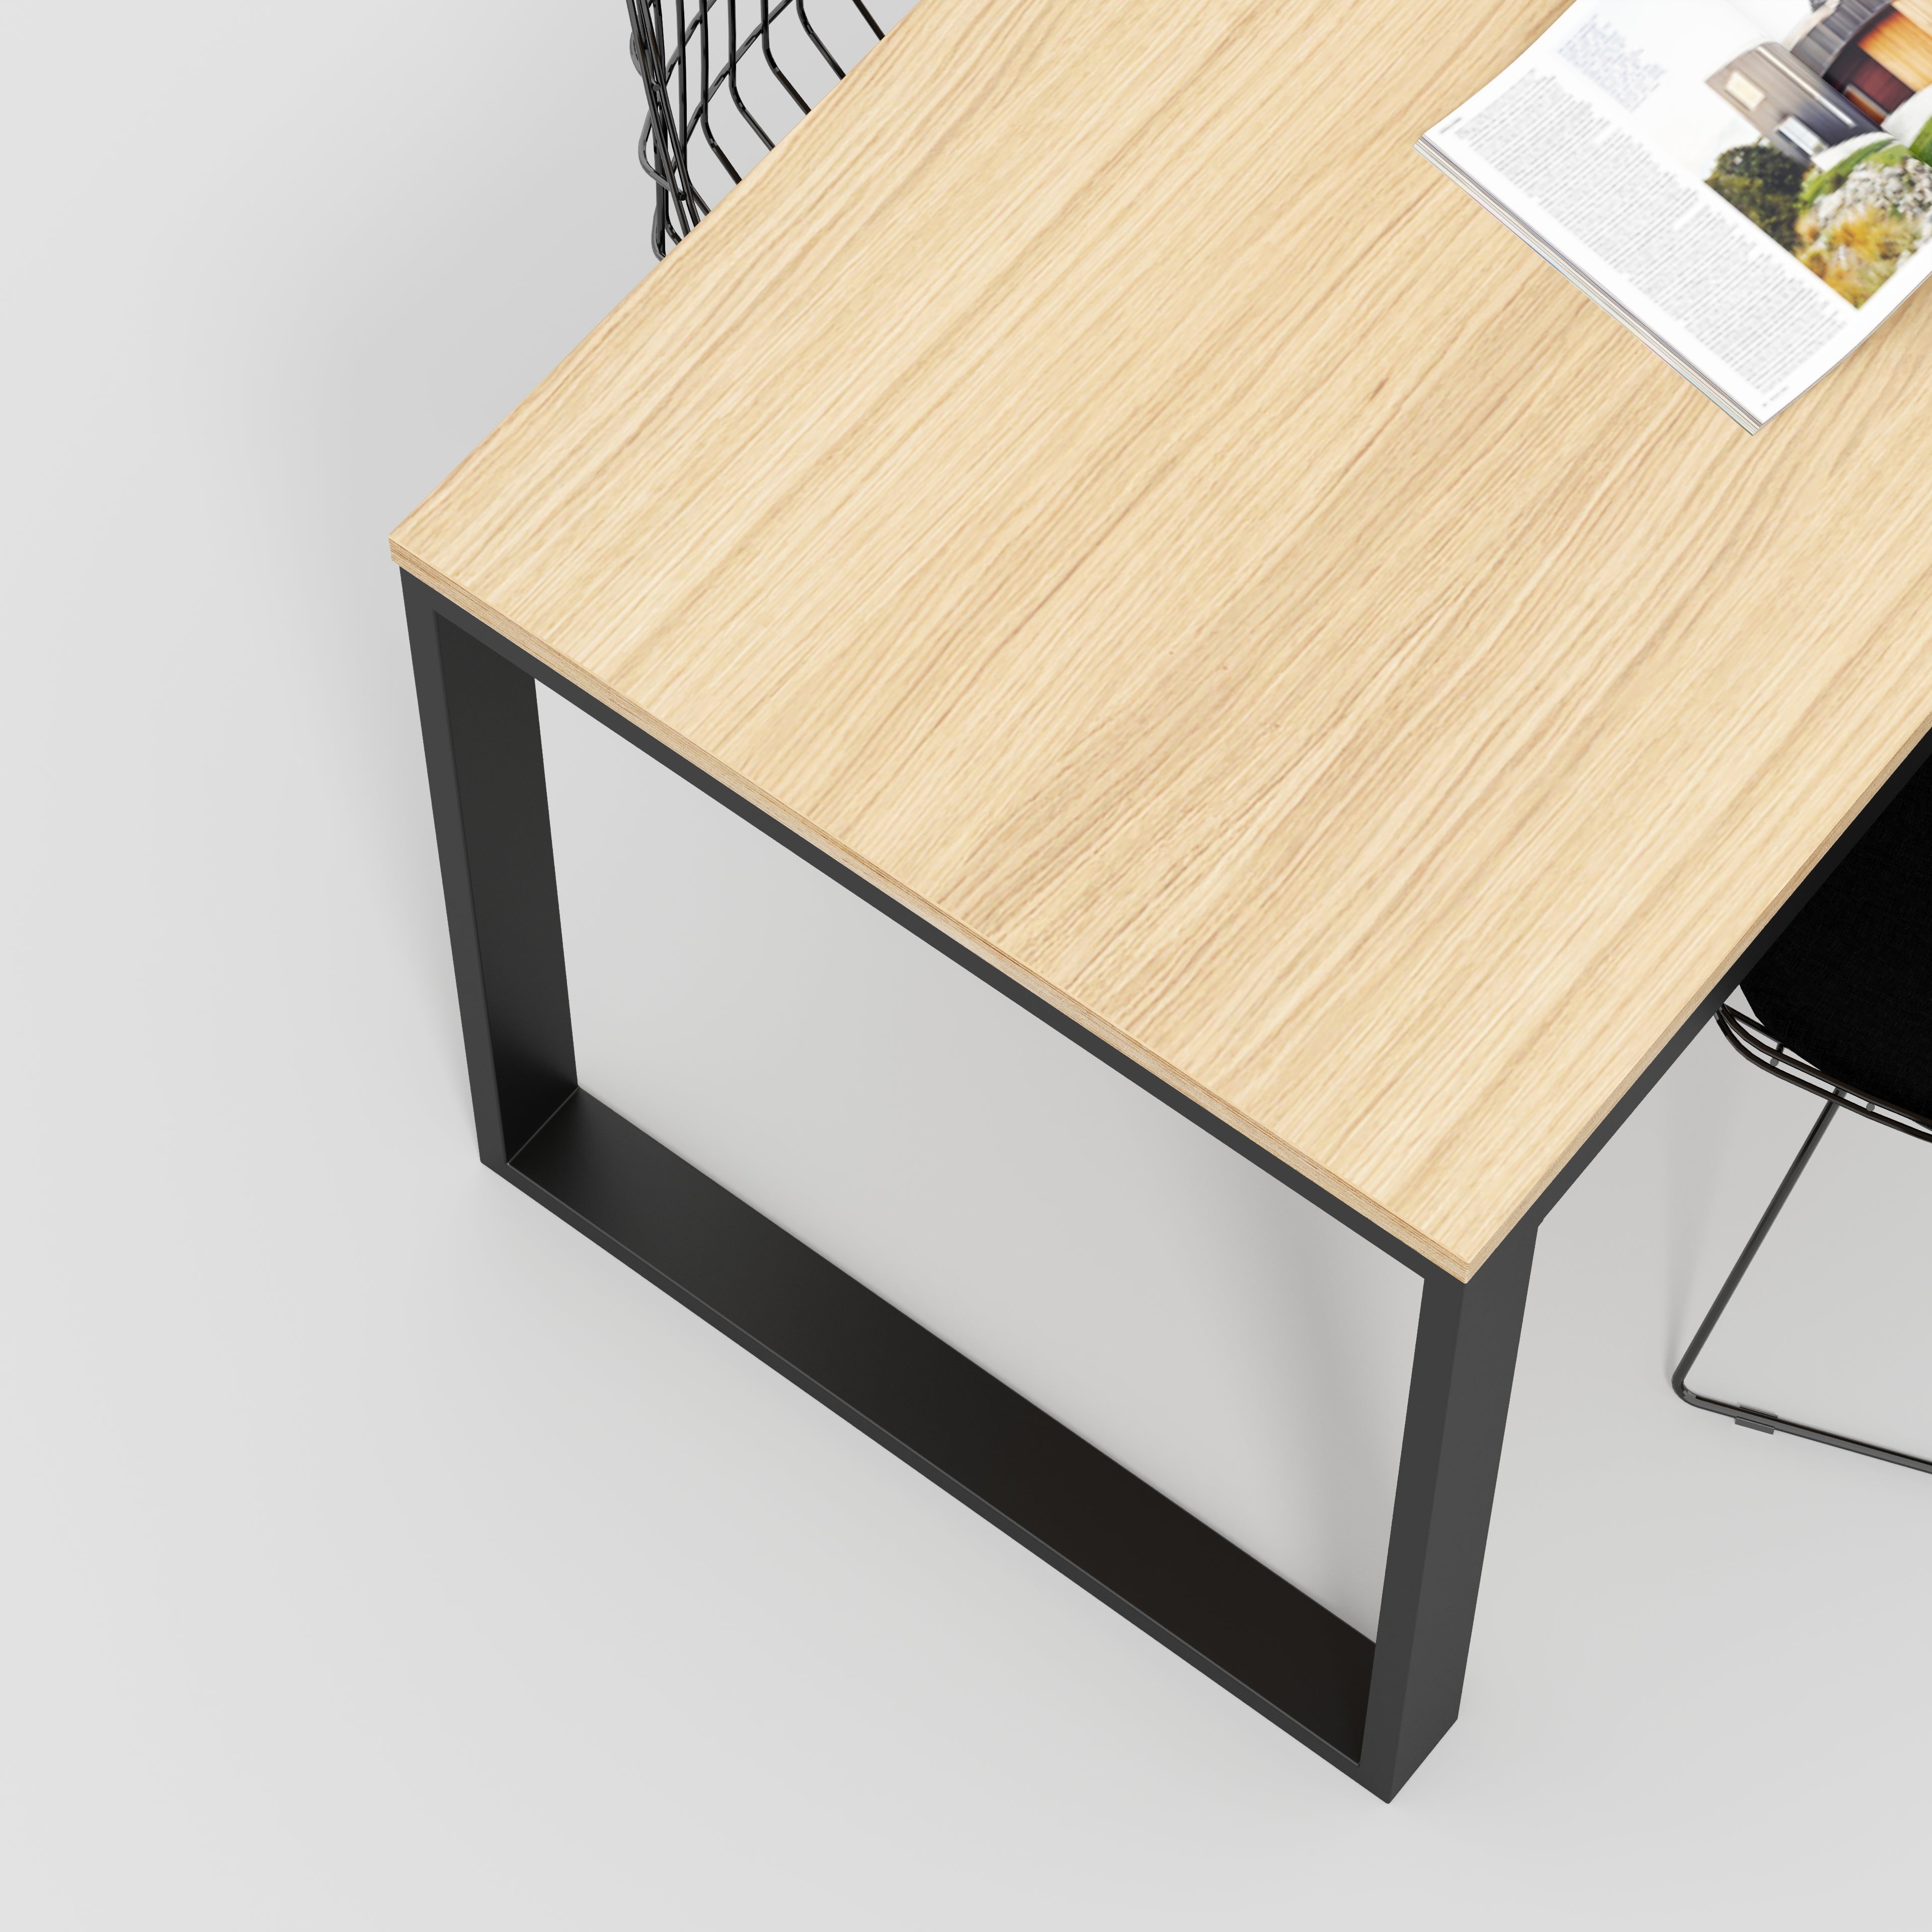 Table with Black Industrial Frame - Plywood Oak - 1500(w) x 745(d) x 735(h)